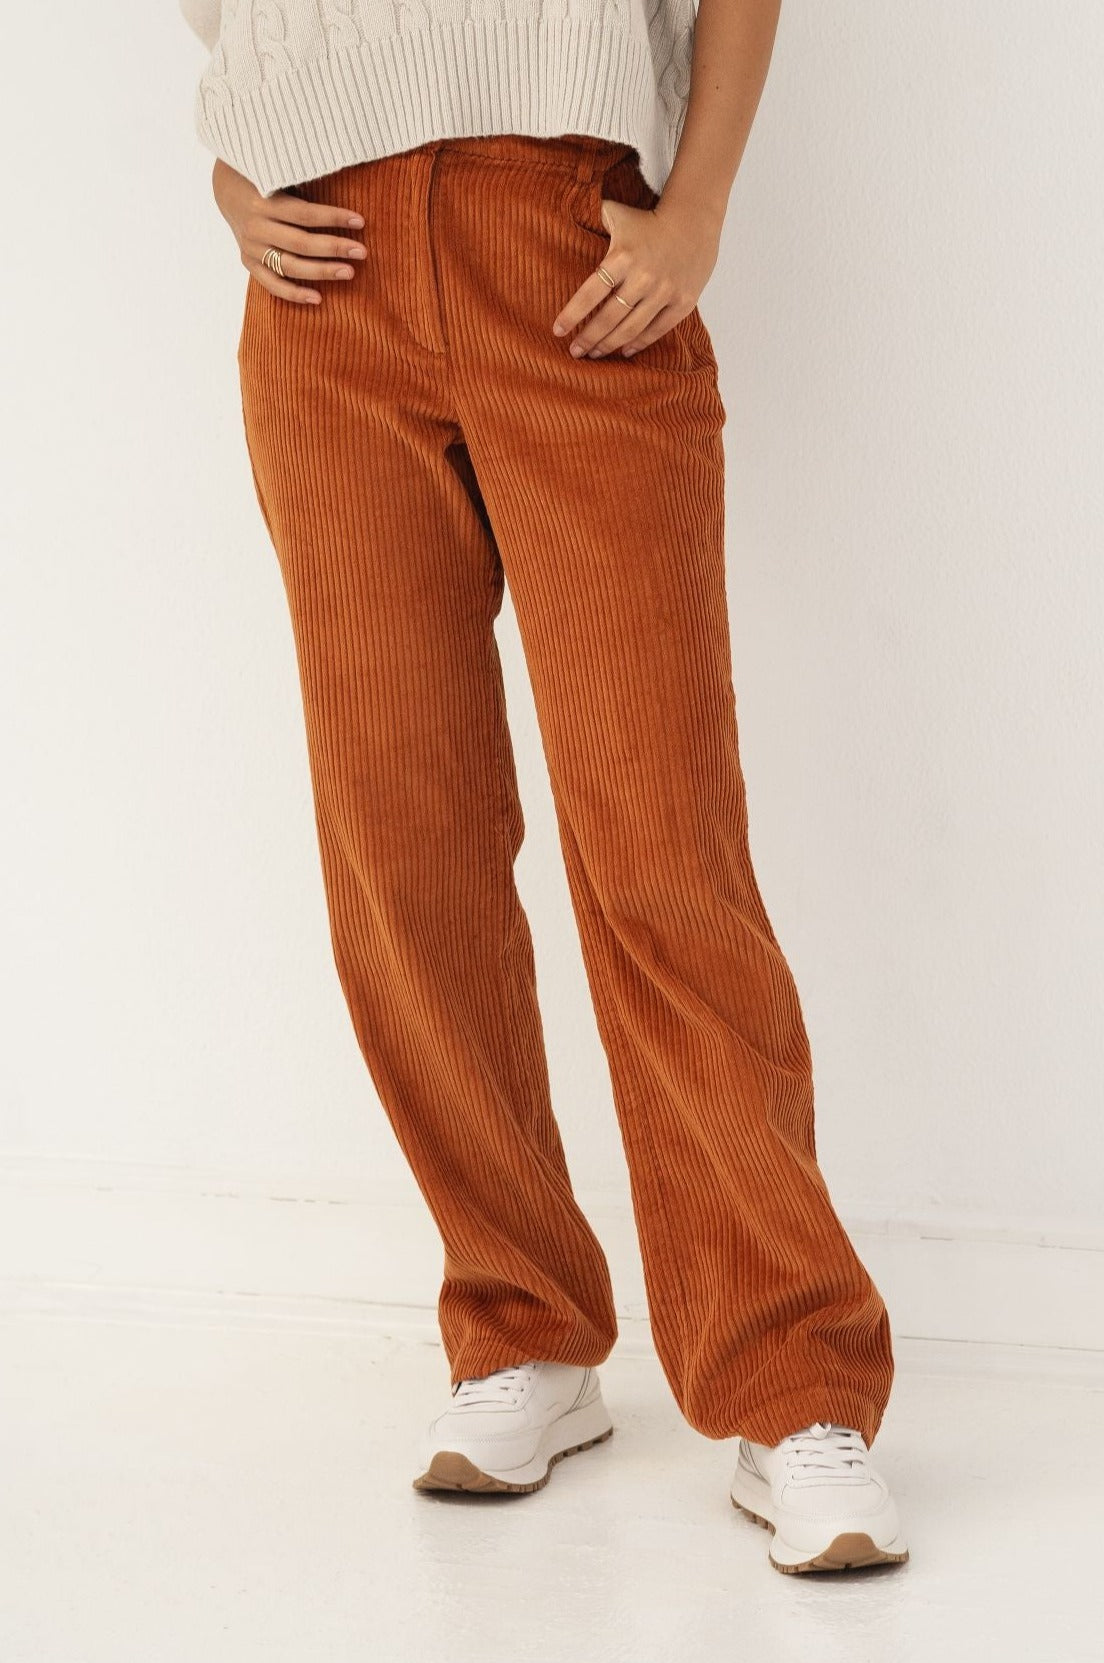 Naz women's corduroy cotton trousers in orange for women with elastic on the waist.